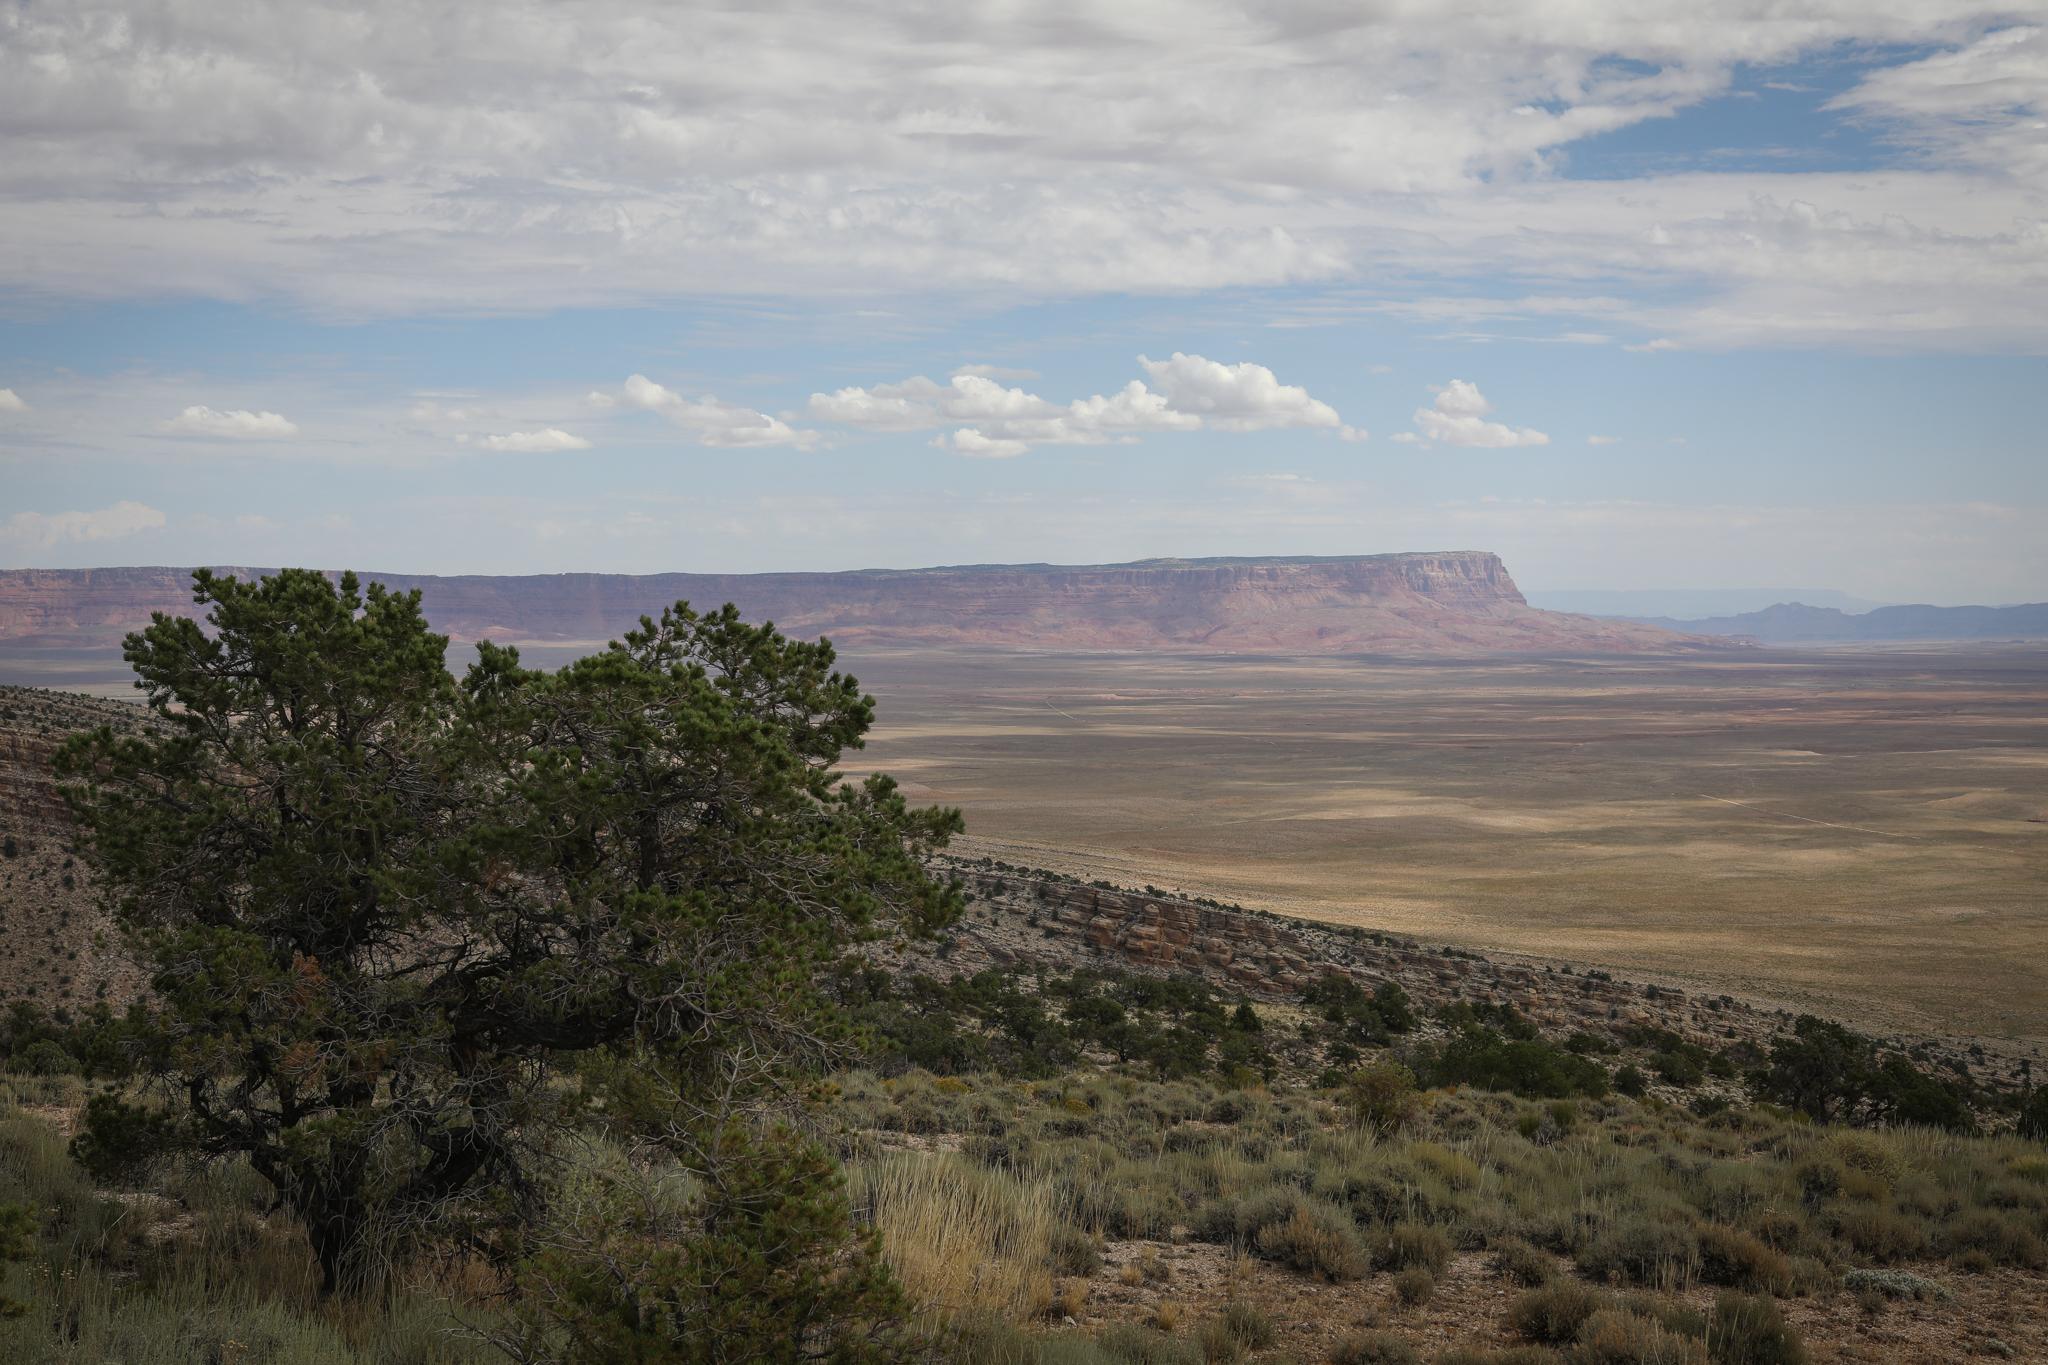 landscape in the Kane Fire area shows distant bluffs and low vegetation in the foreground